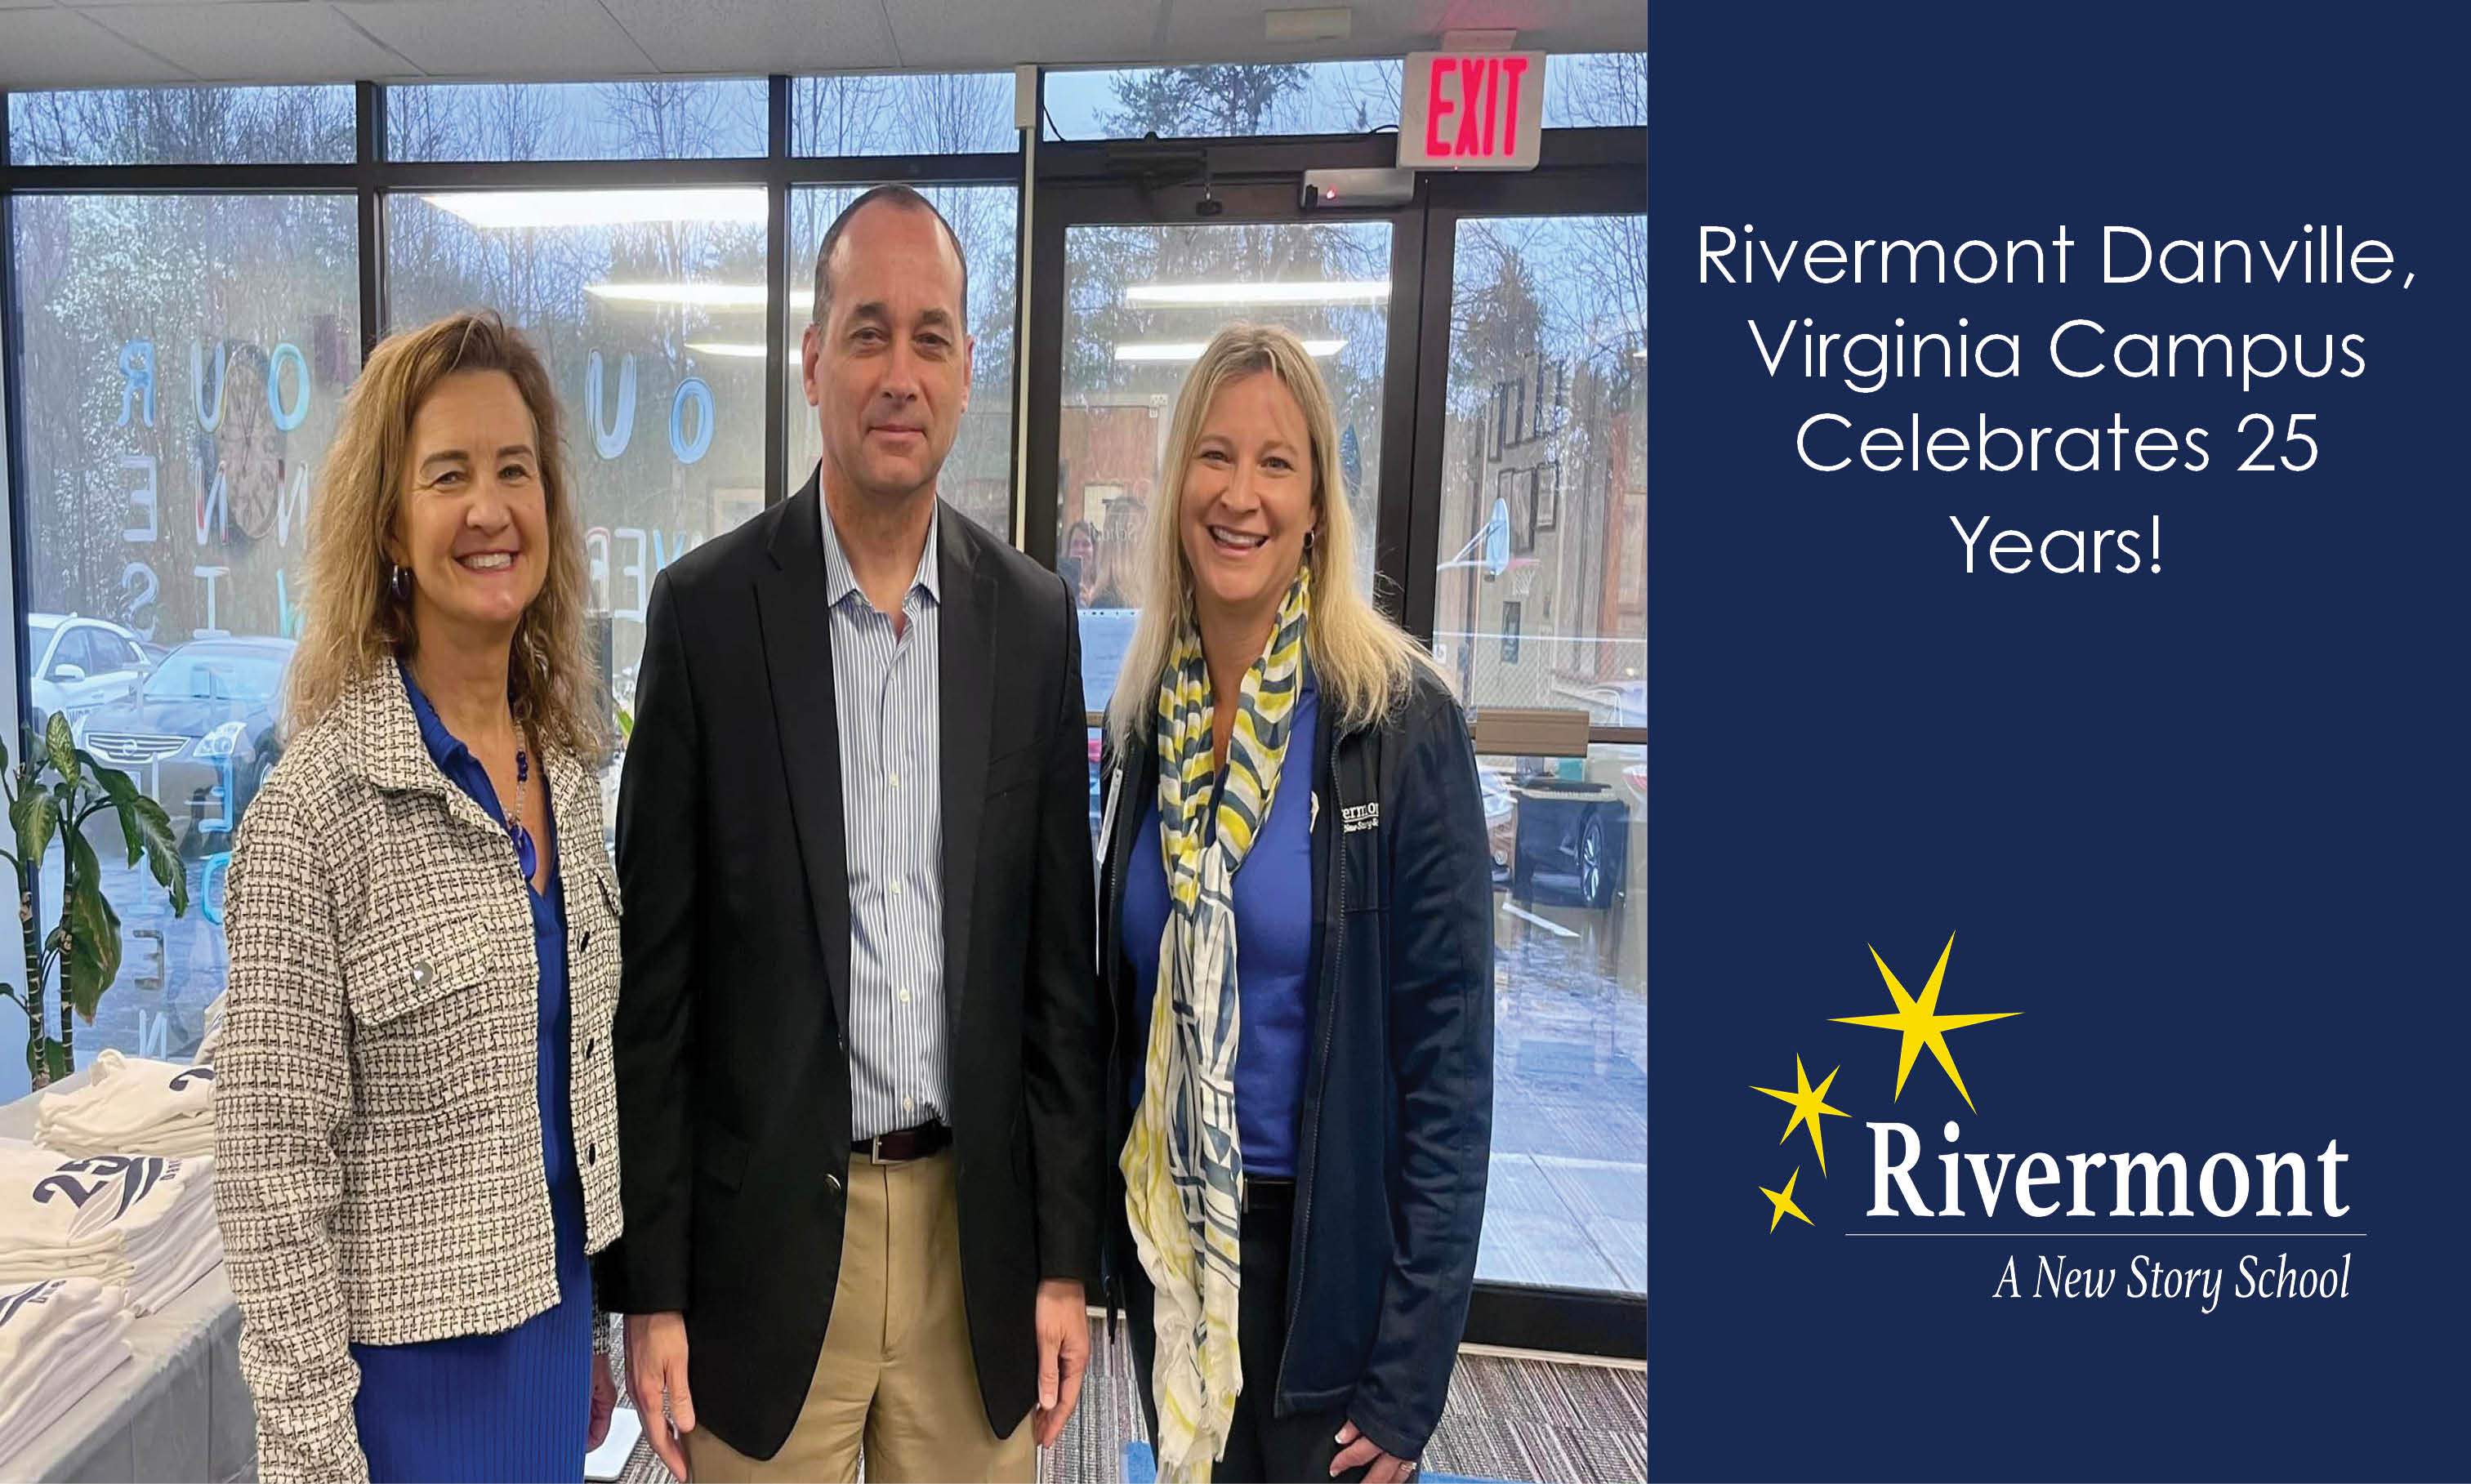 Rivermont Danville, Virginia Campus Celebrates 25 Years! New Story